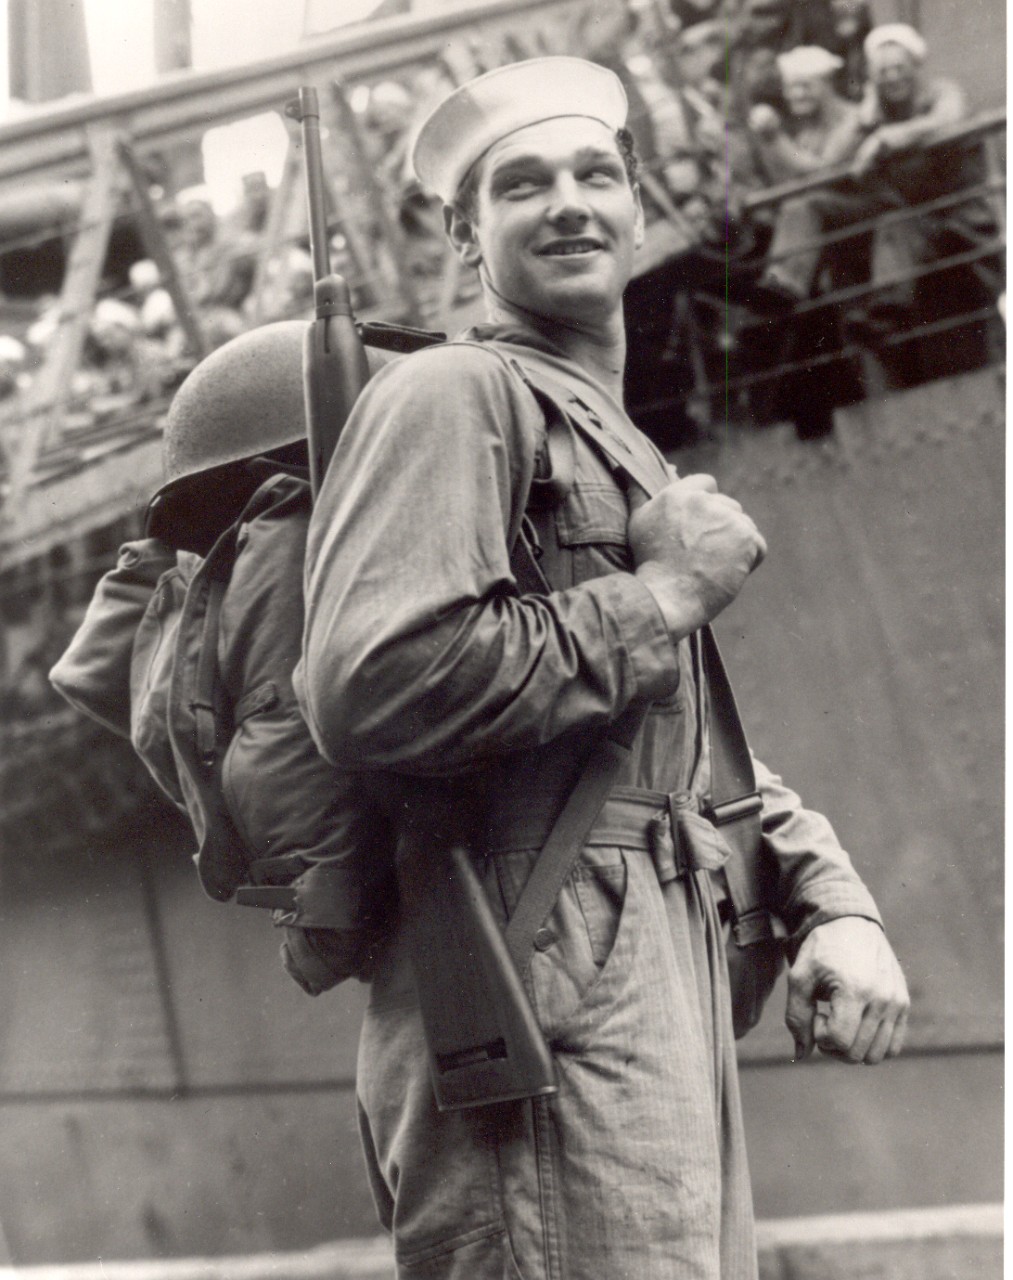 Seabee Lloyd Piercy getting ready to board a ship for the Pacific Theater, circa 1942.